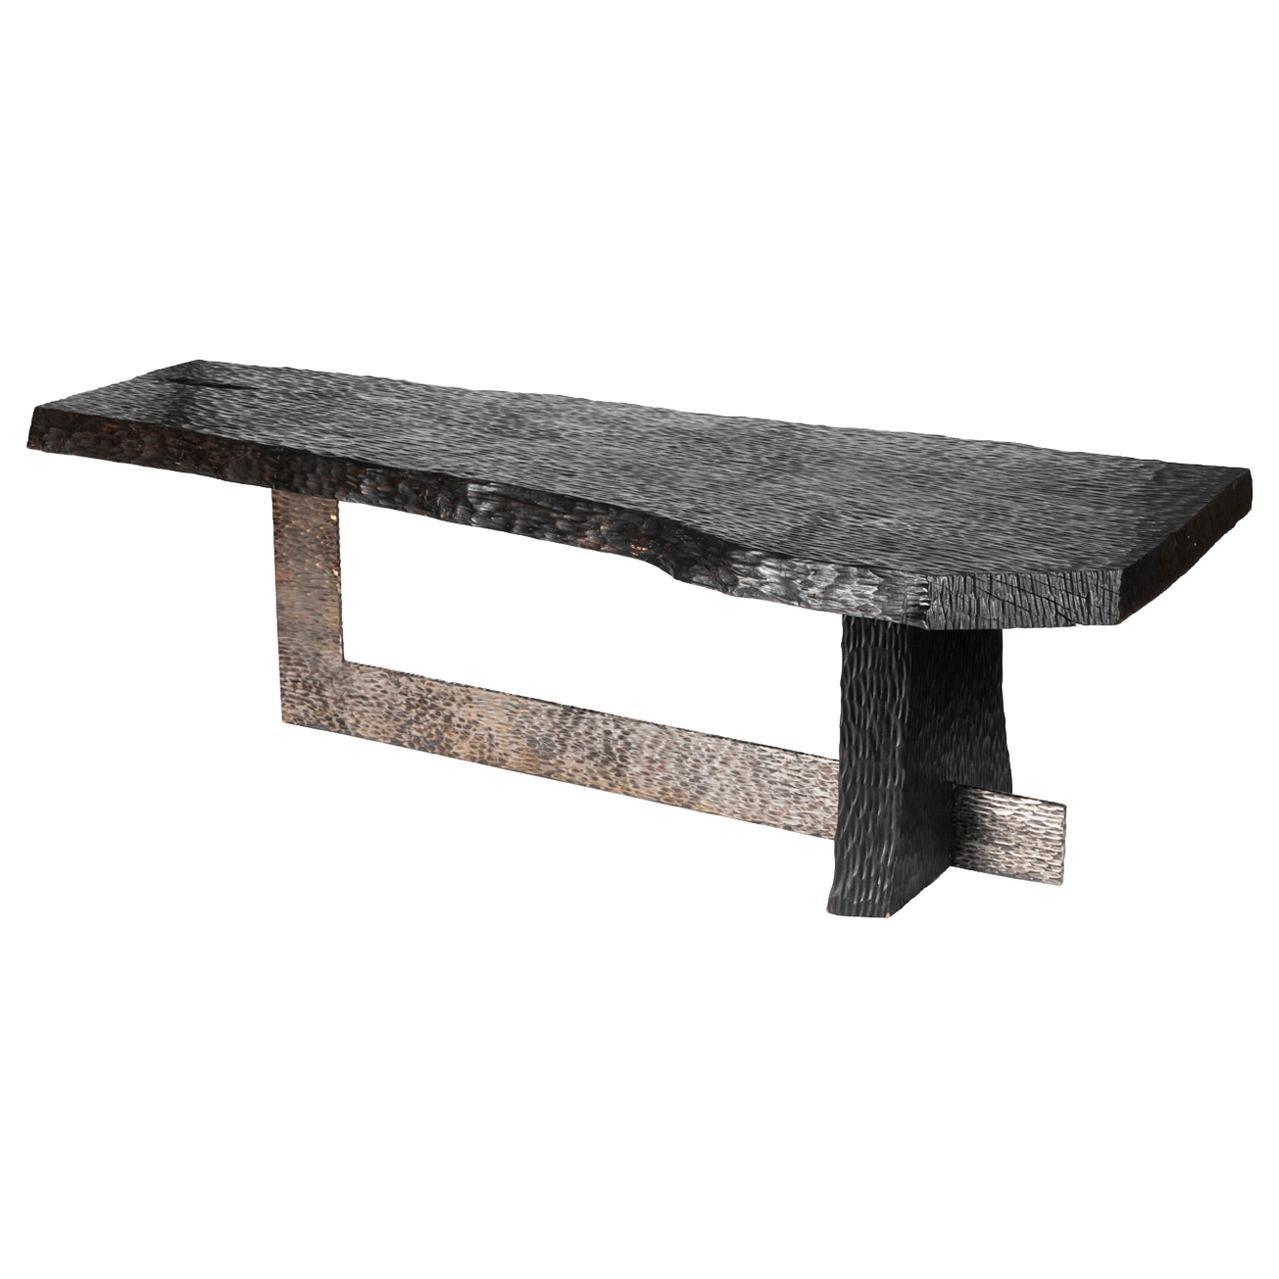 Blackened Gouged Wood Coffee Table, Contemporary Work